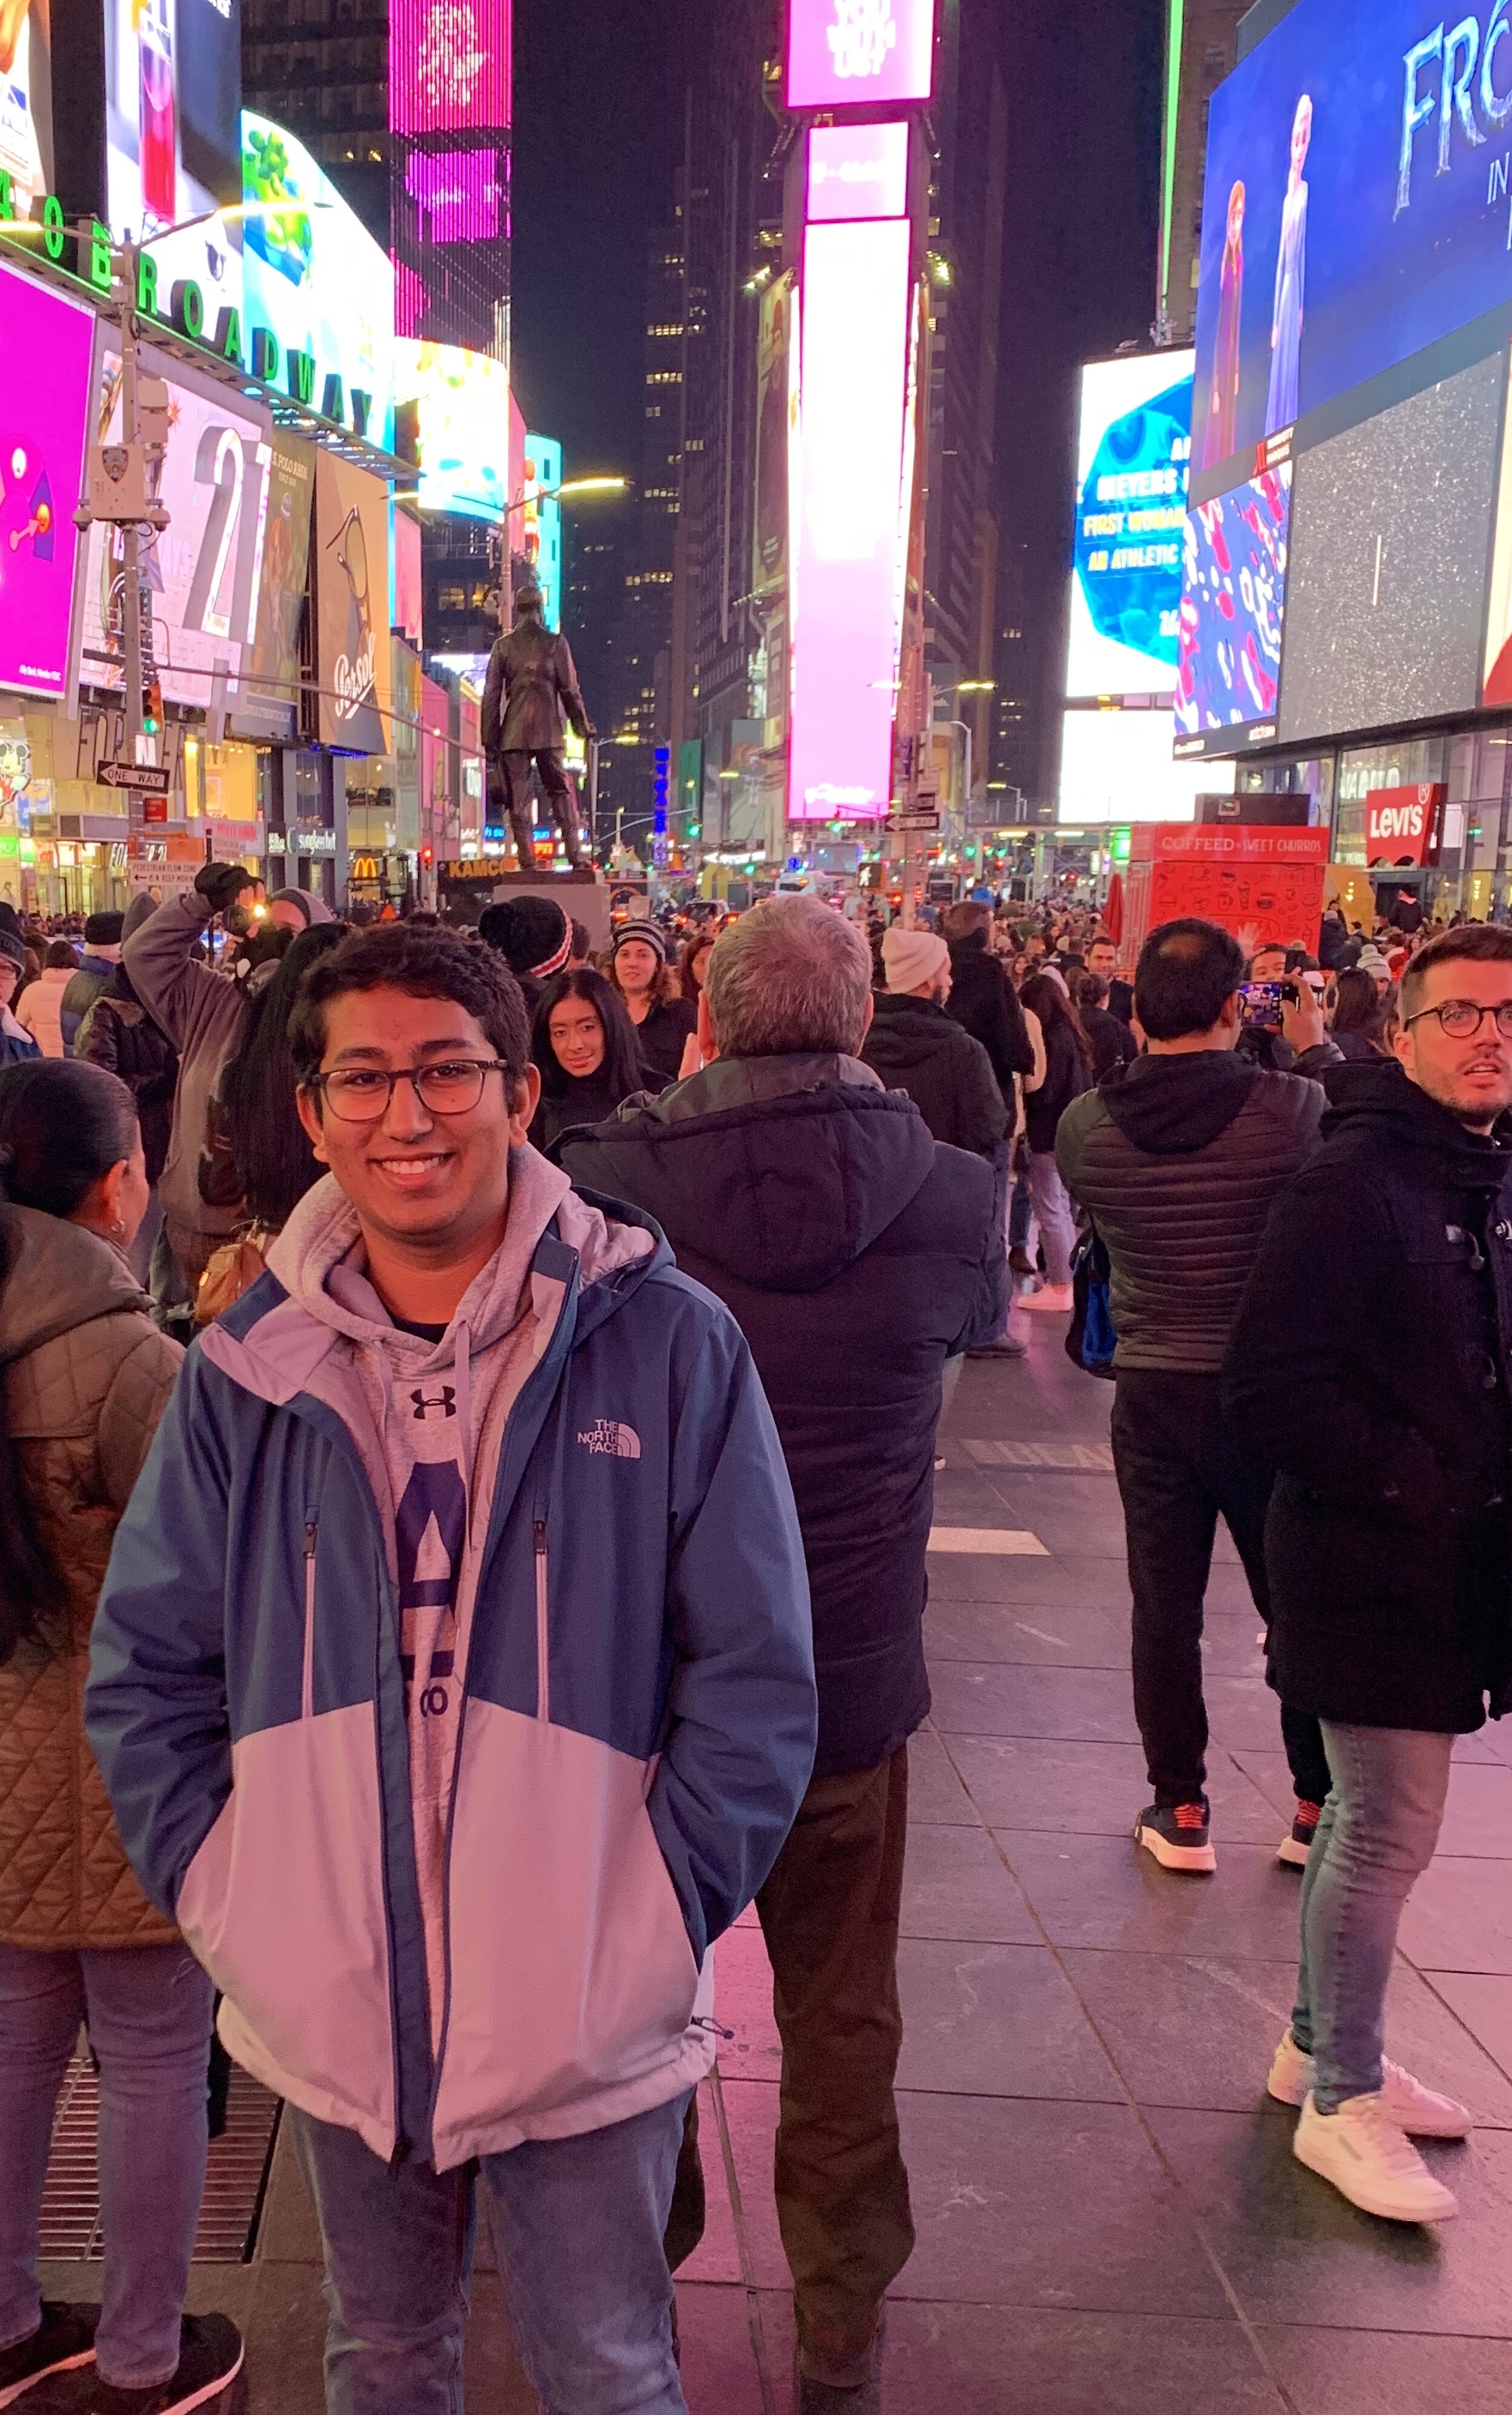 A picture of me in Times Square of NYC